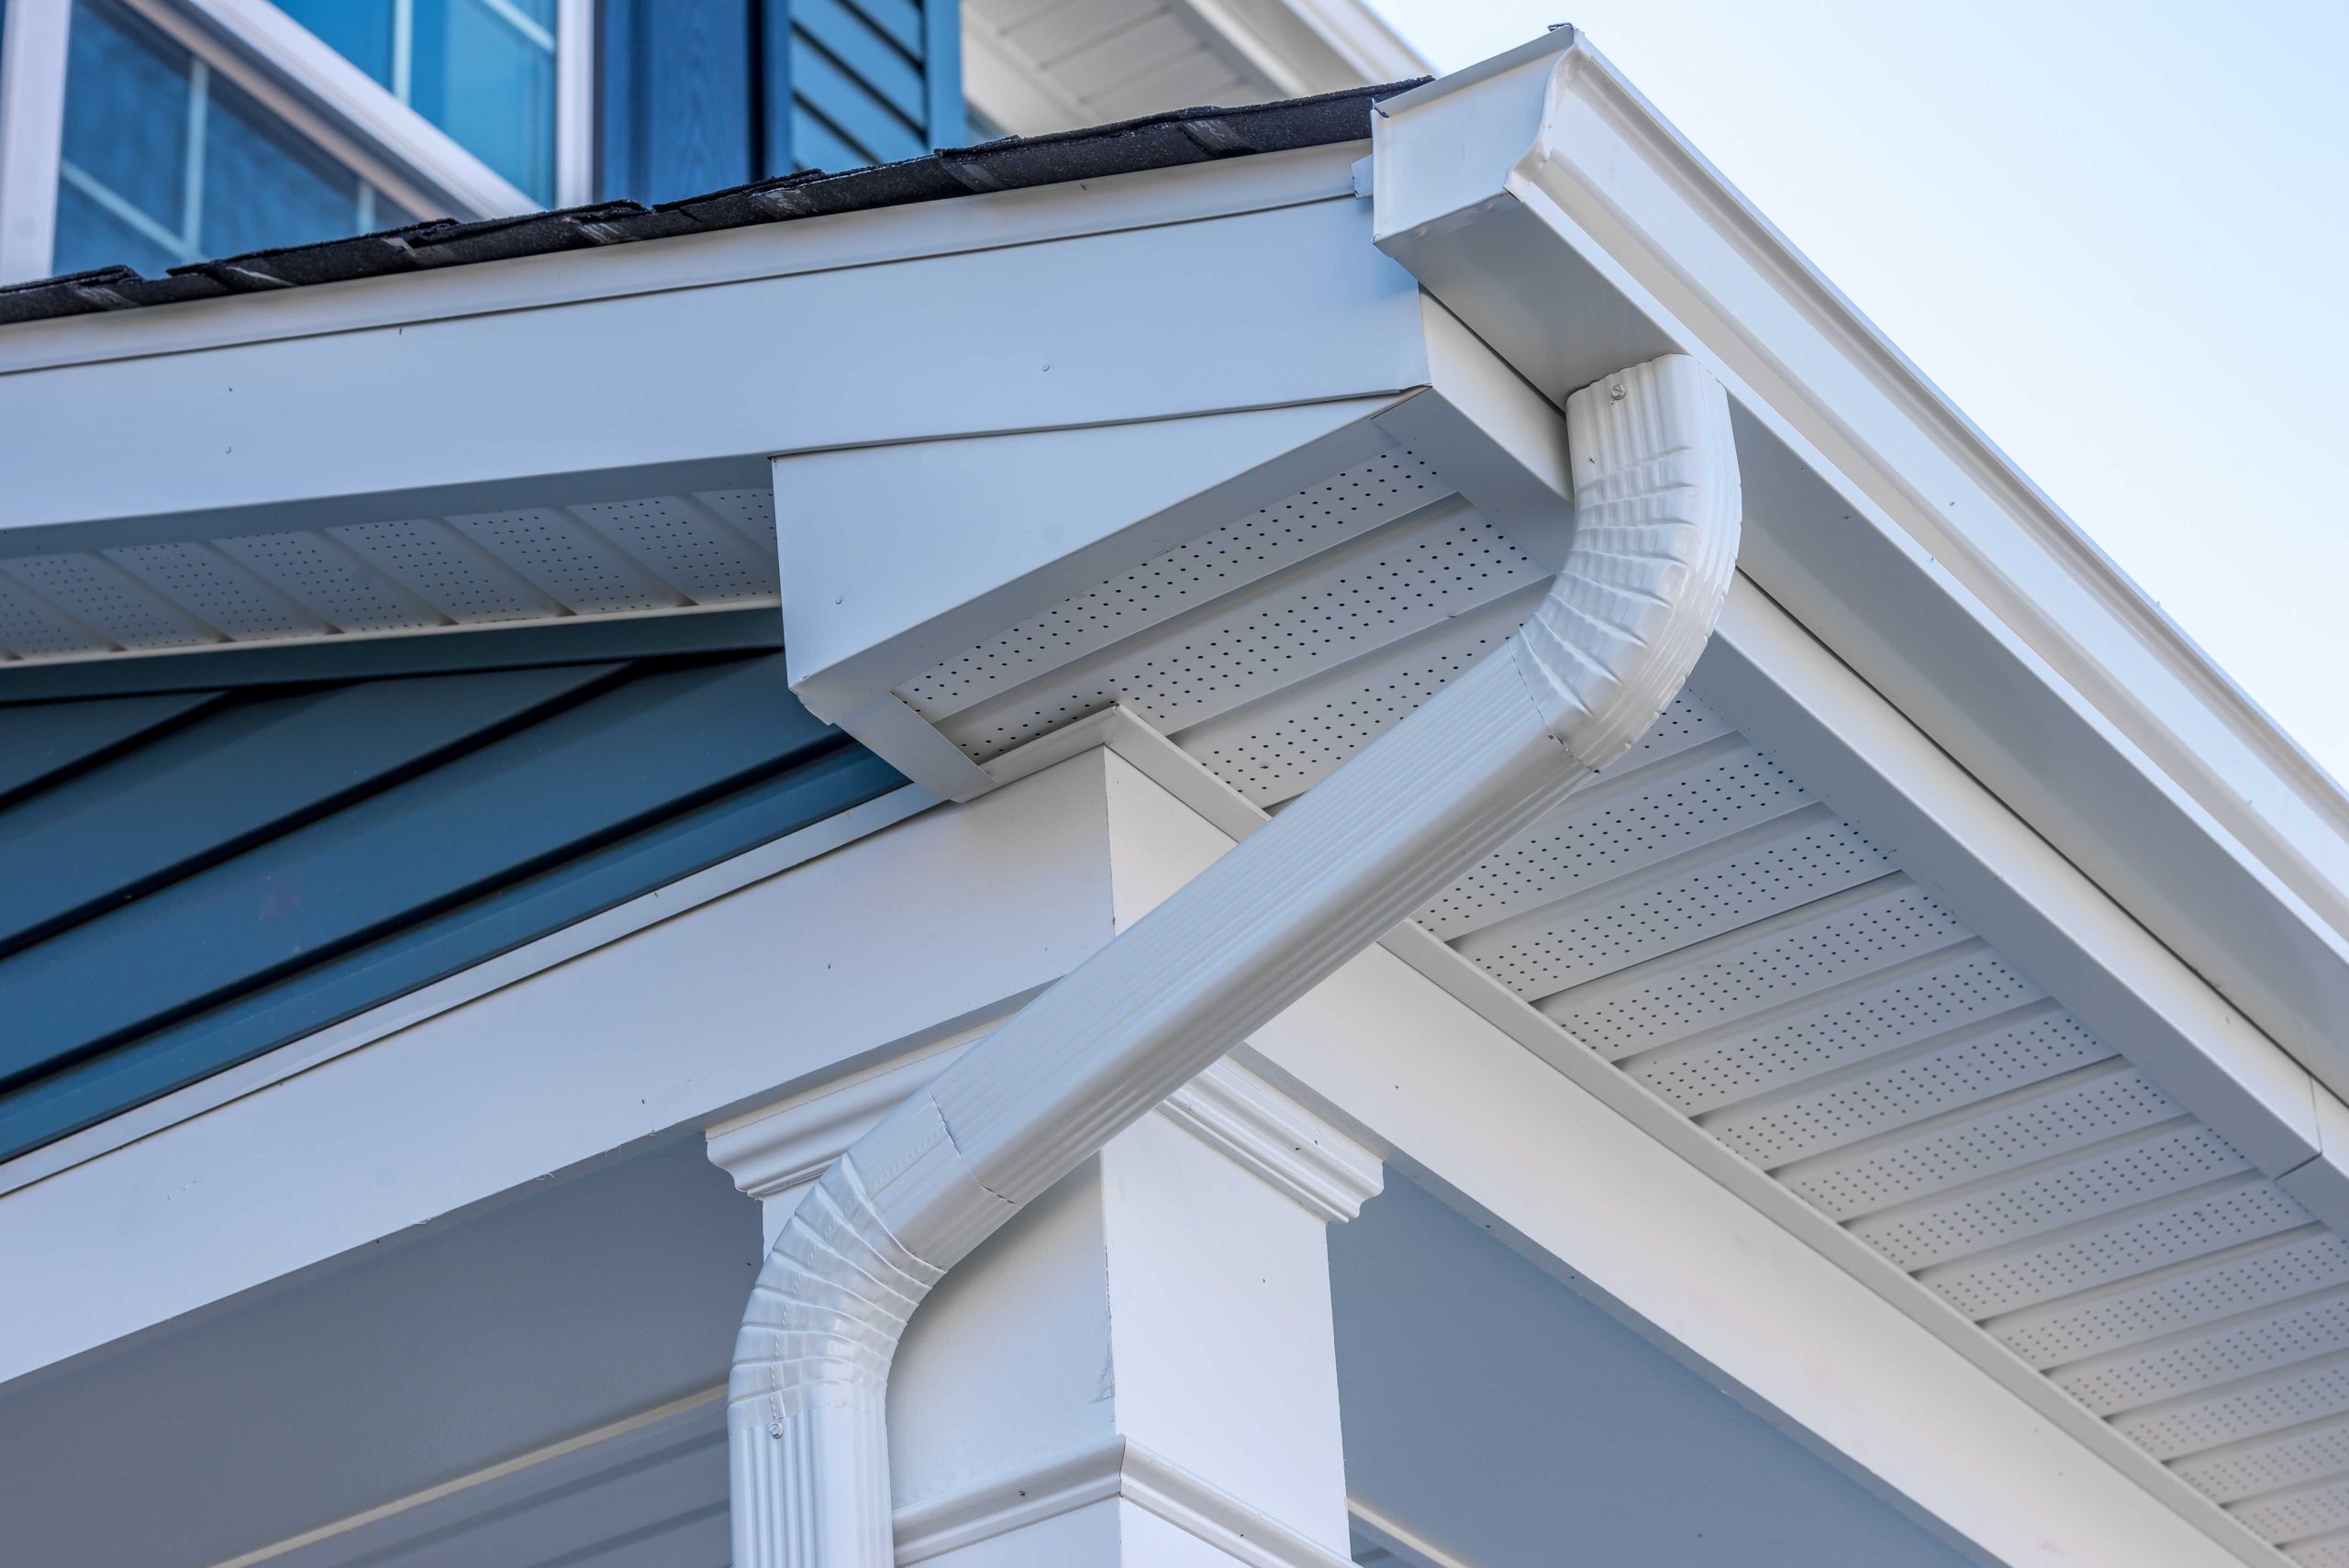 Image of a durable and lightweight Vinyl Gutter system in white color, installed on a residential house roof. The Vinyl material is resistant to rust, corrosion, and fading, making it ideal for long-lasting protection against rainwater damage.